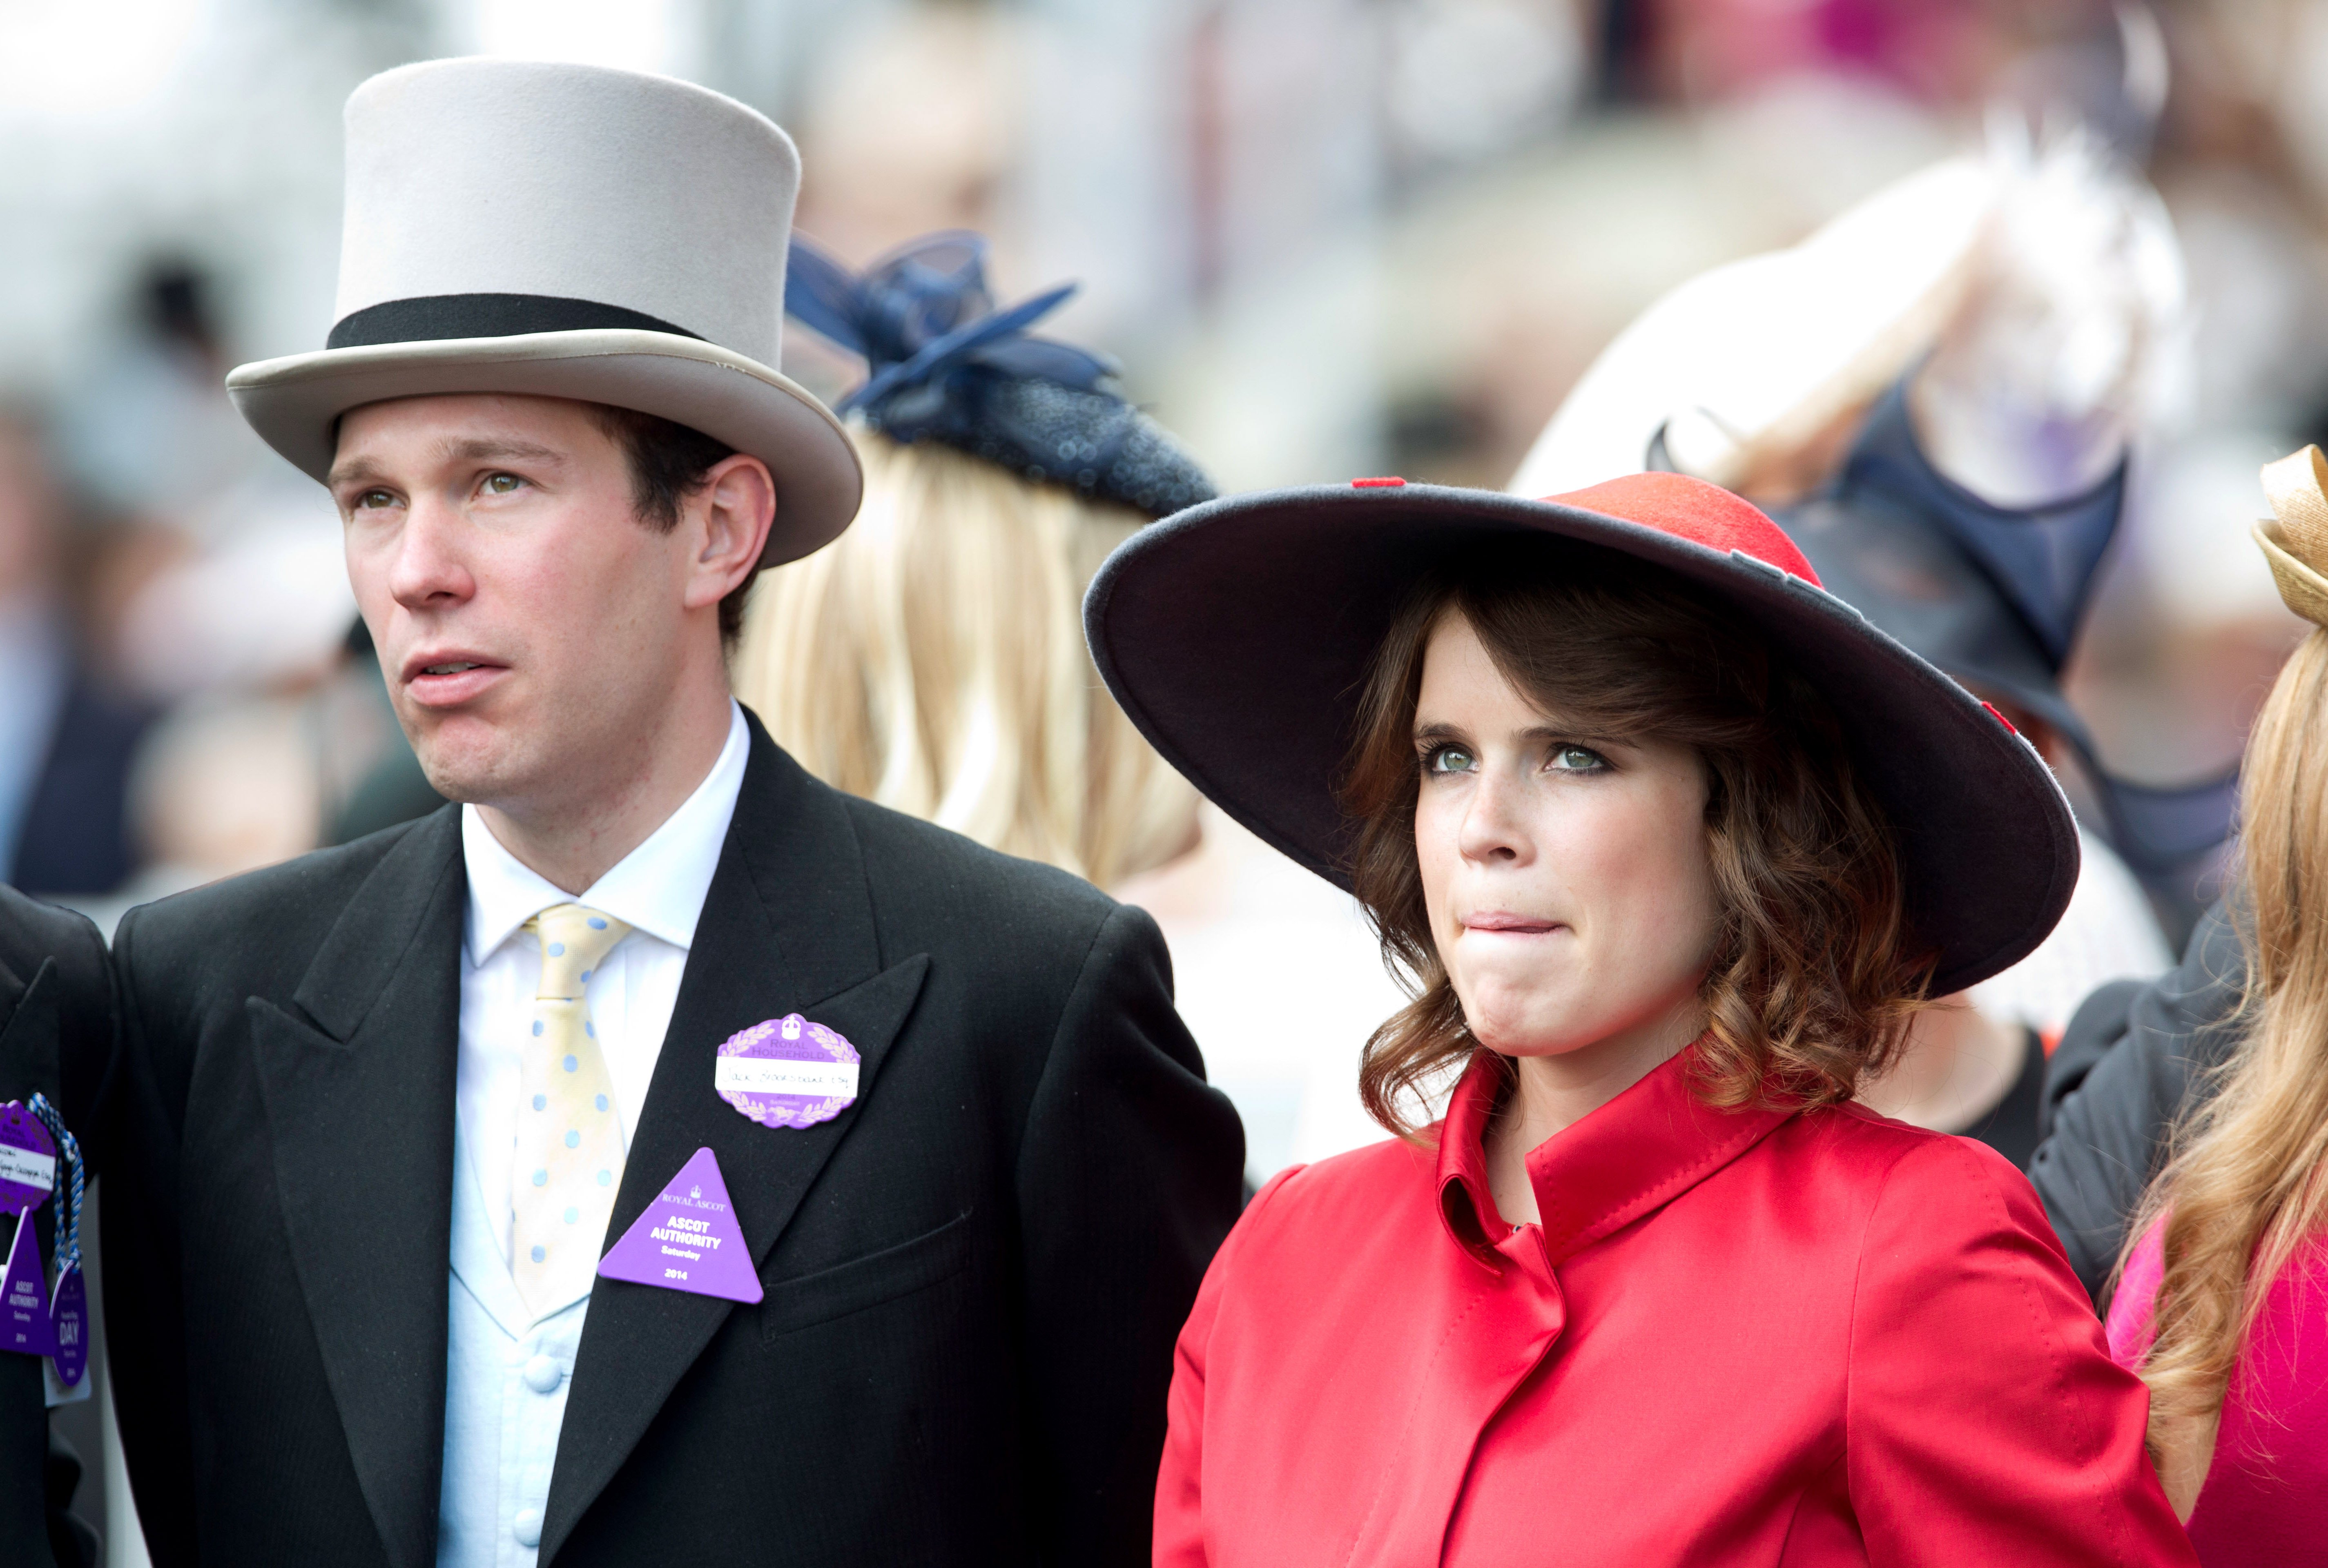 Jack Brooksbank and Princess Eugenie attend Day 5 of Royal Ascot at Ascot Racecourse on June 21, 2014 in Ascot, England. | Source: Getty Images